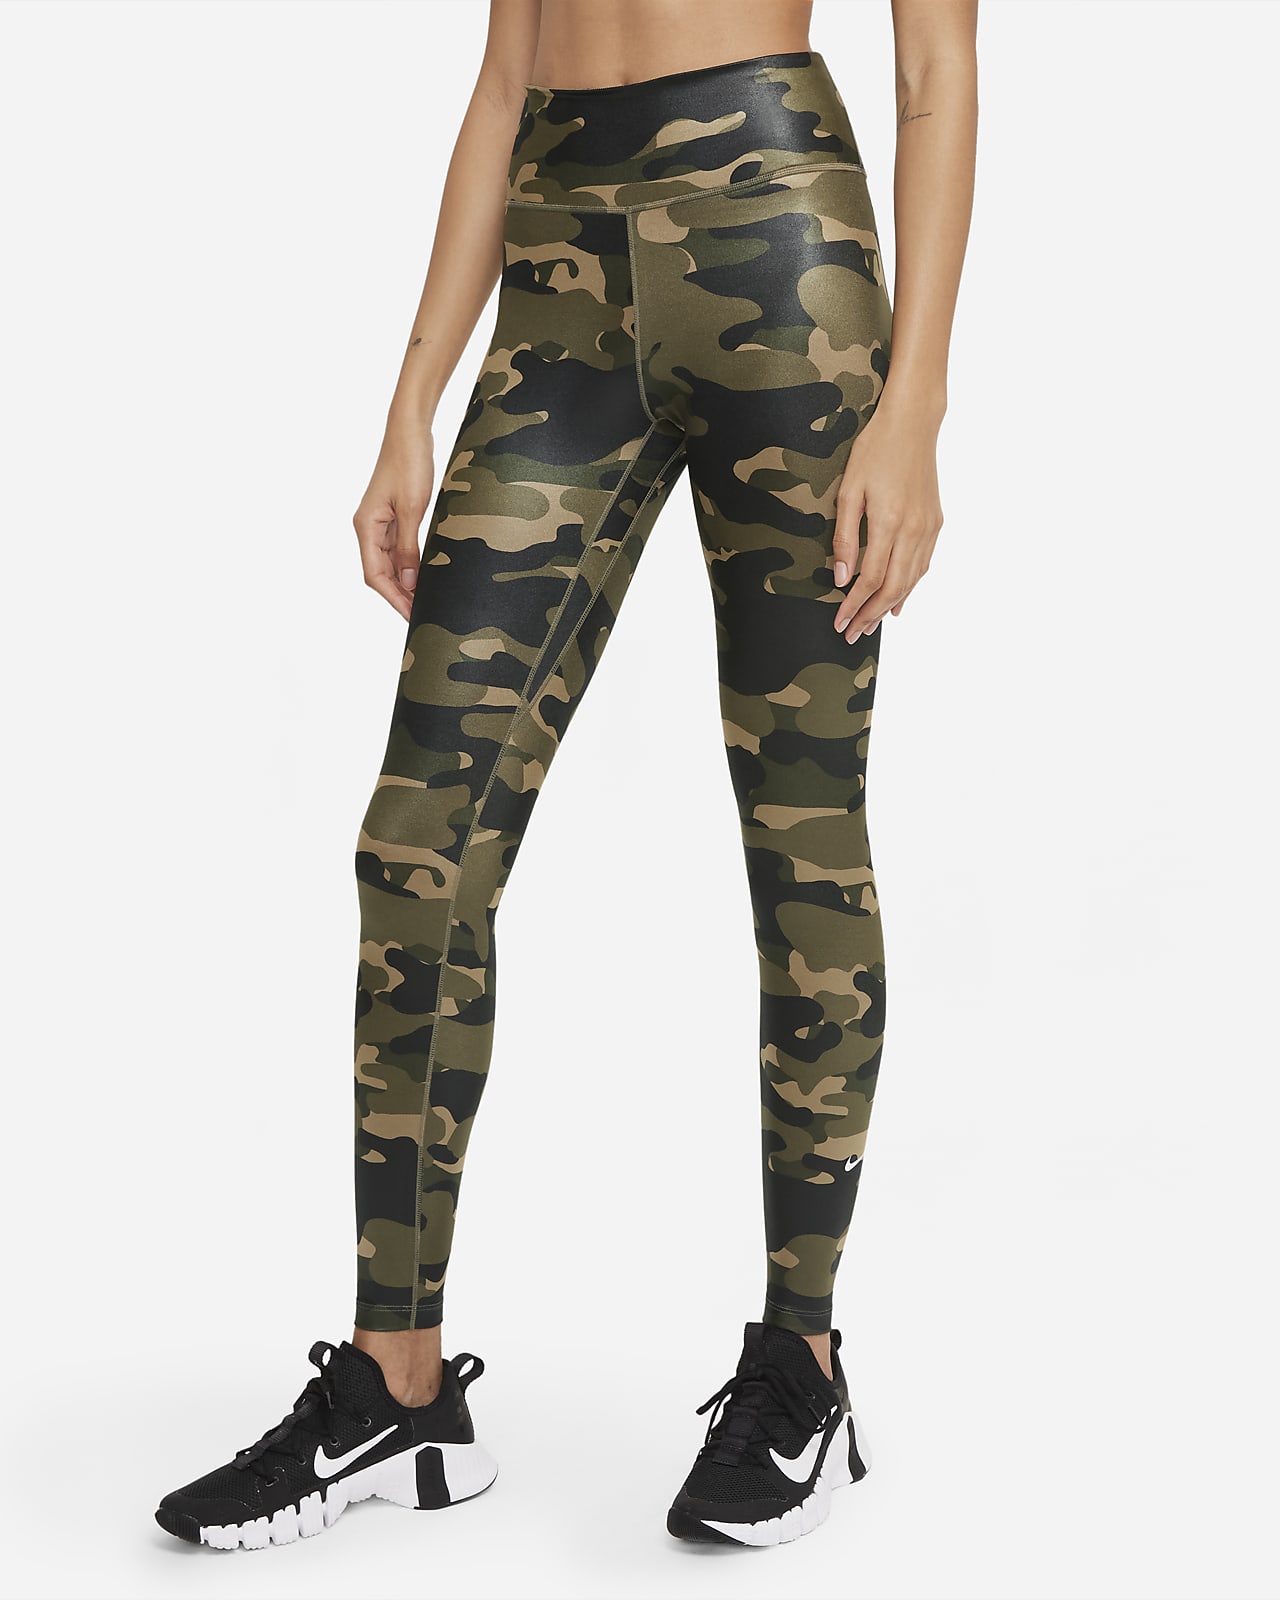 Women's Camo Mid-Rise Leggings Yoga Tights Workout Fitness Activewear Gym